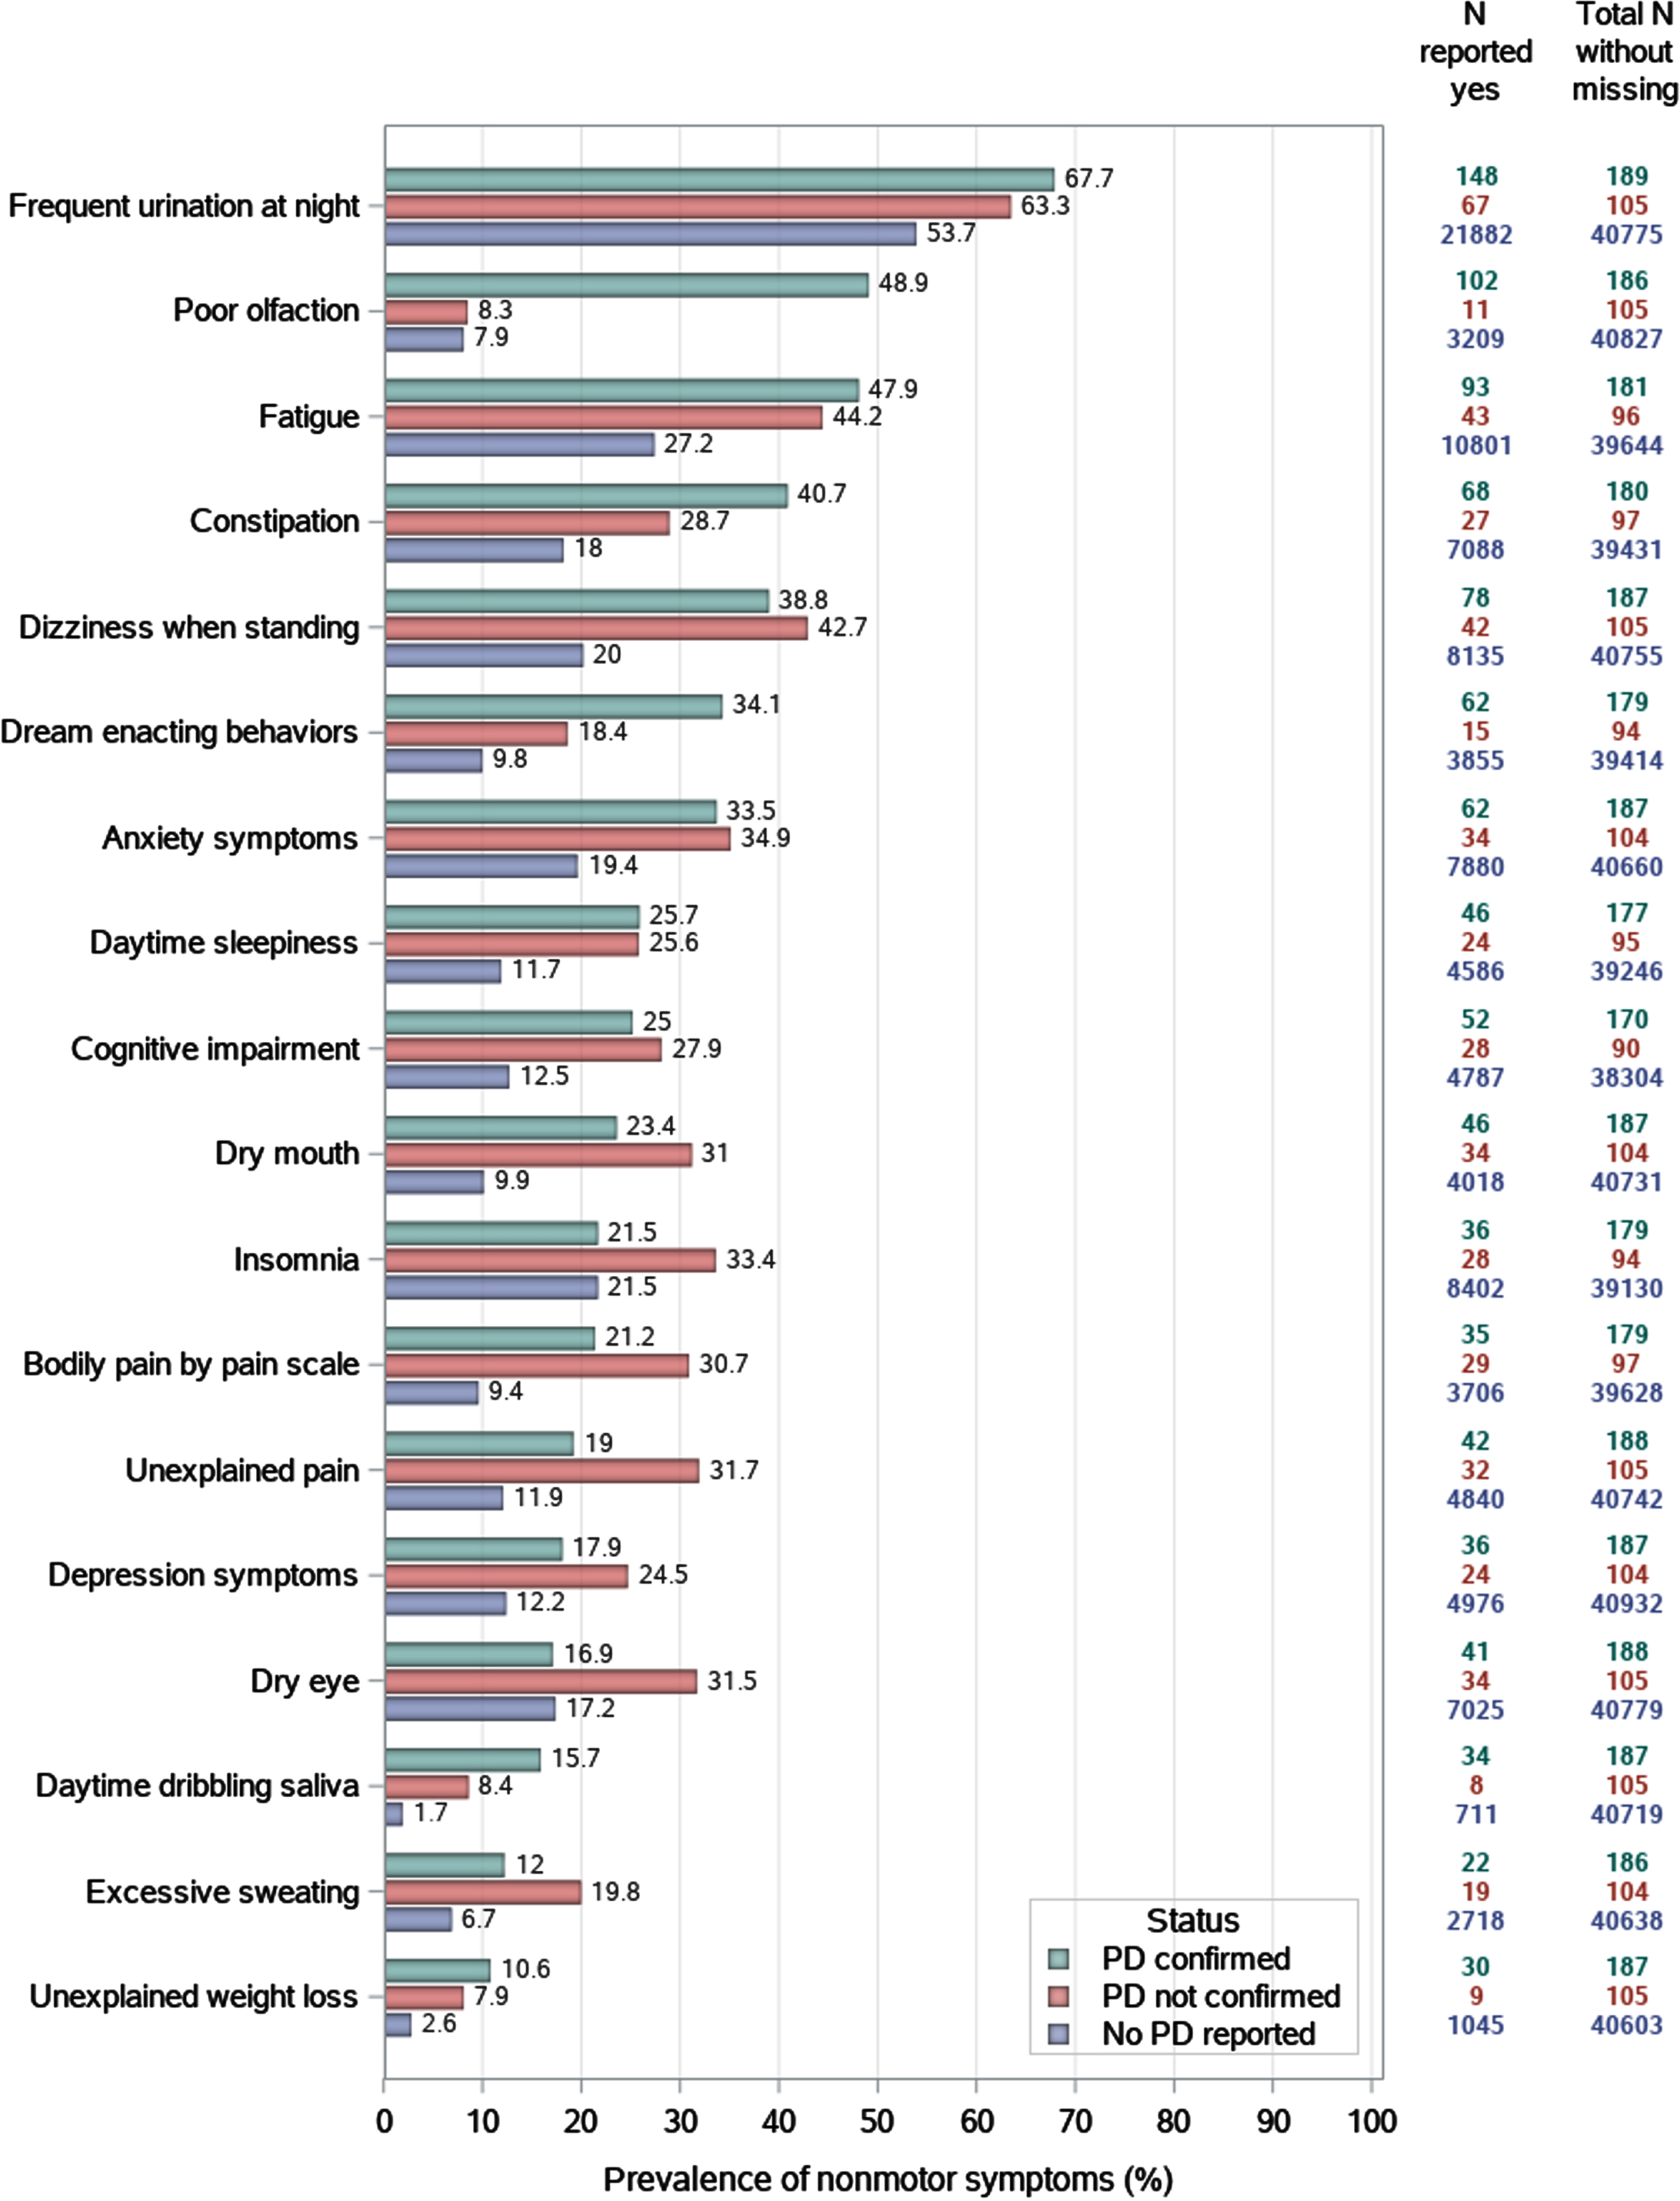 Self-reported nonmotor symptoms of confirmed Parkinson’s disease cases, unconfirmed cases, versus controls, using data from the cohort’s third detailed follow-up.